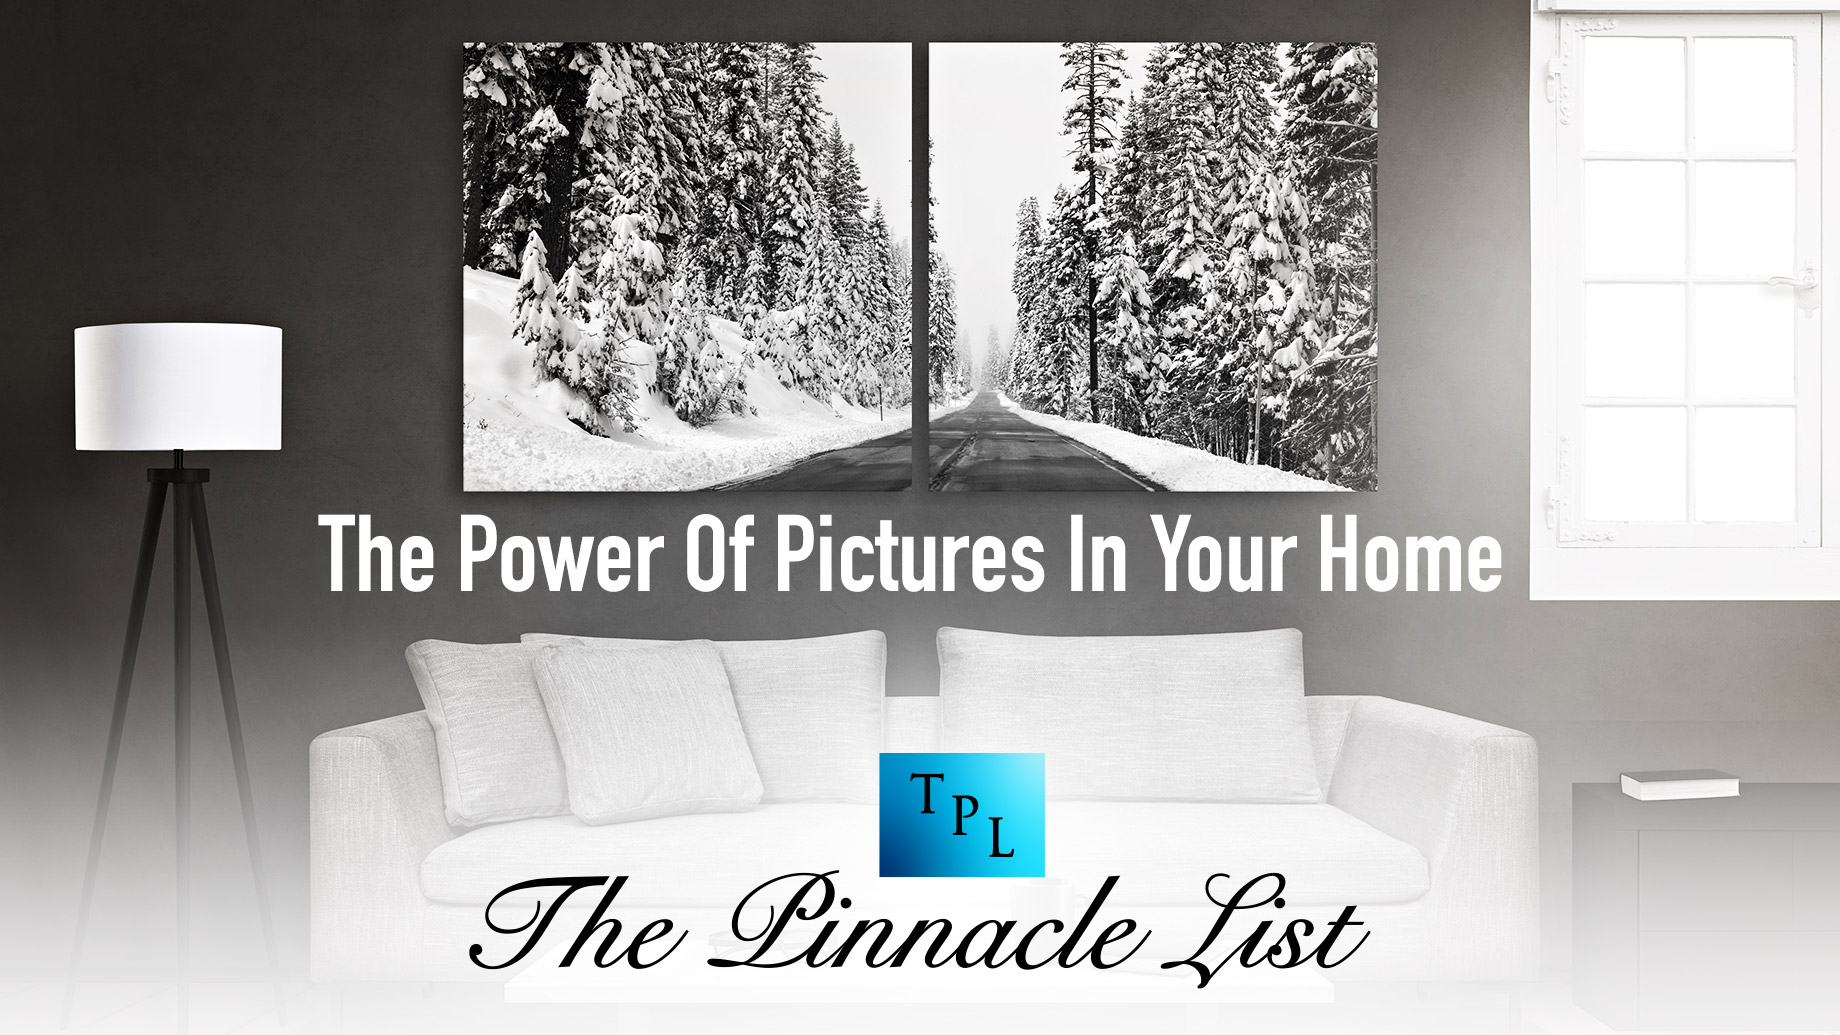 The Power Of Pictures In Your Home